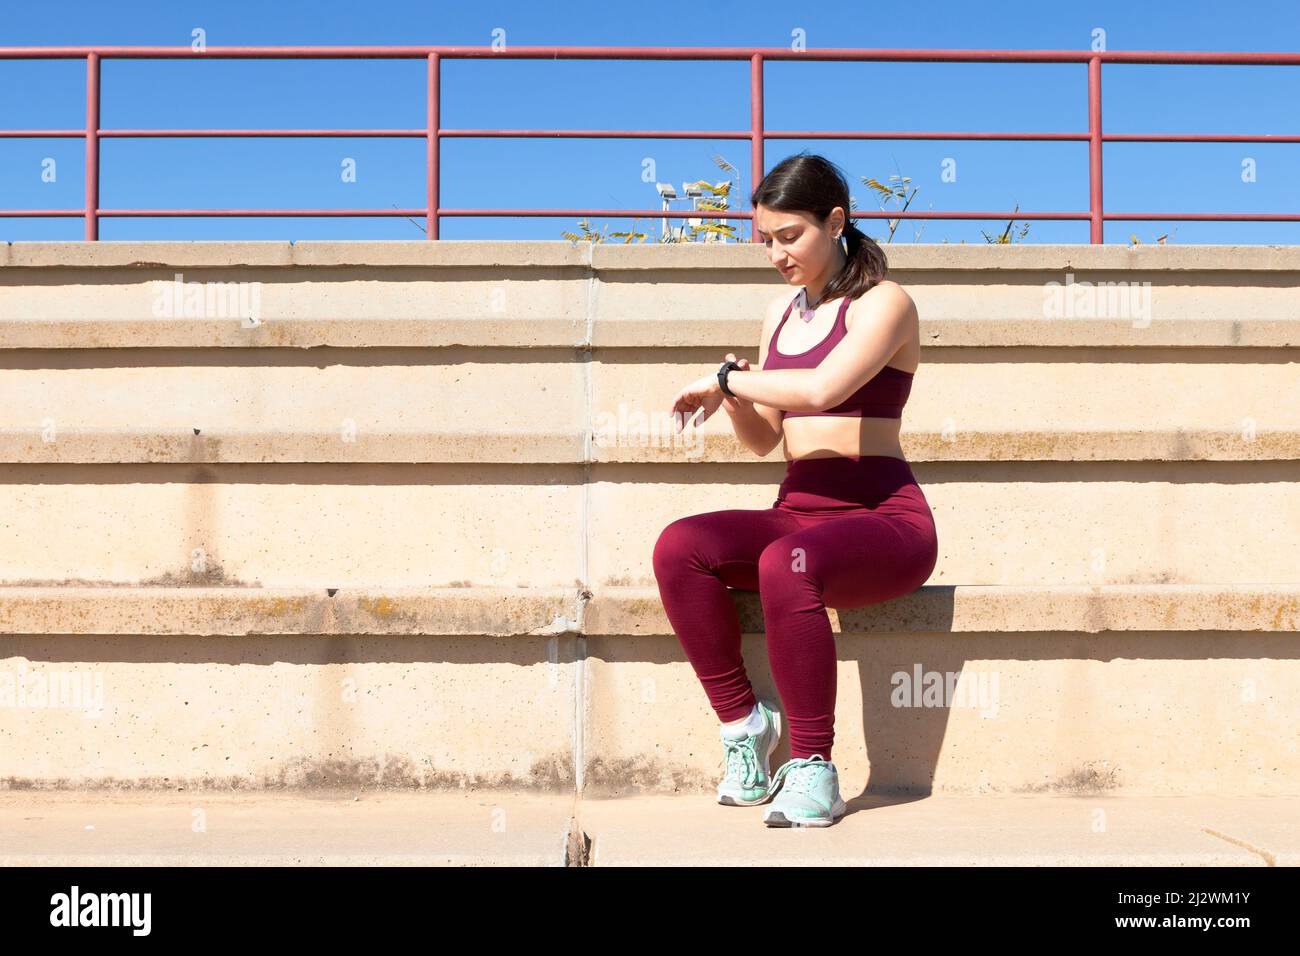 General shot of a young Caucasian female athlete dressed in maroon leggings, a purple top and turquoise sneakers is sitting on a bleacher while touchi Stock Photo